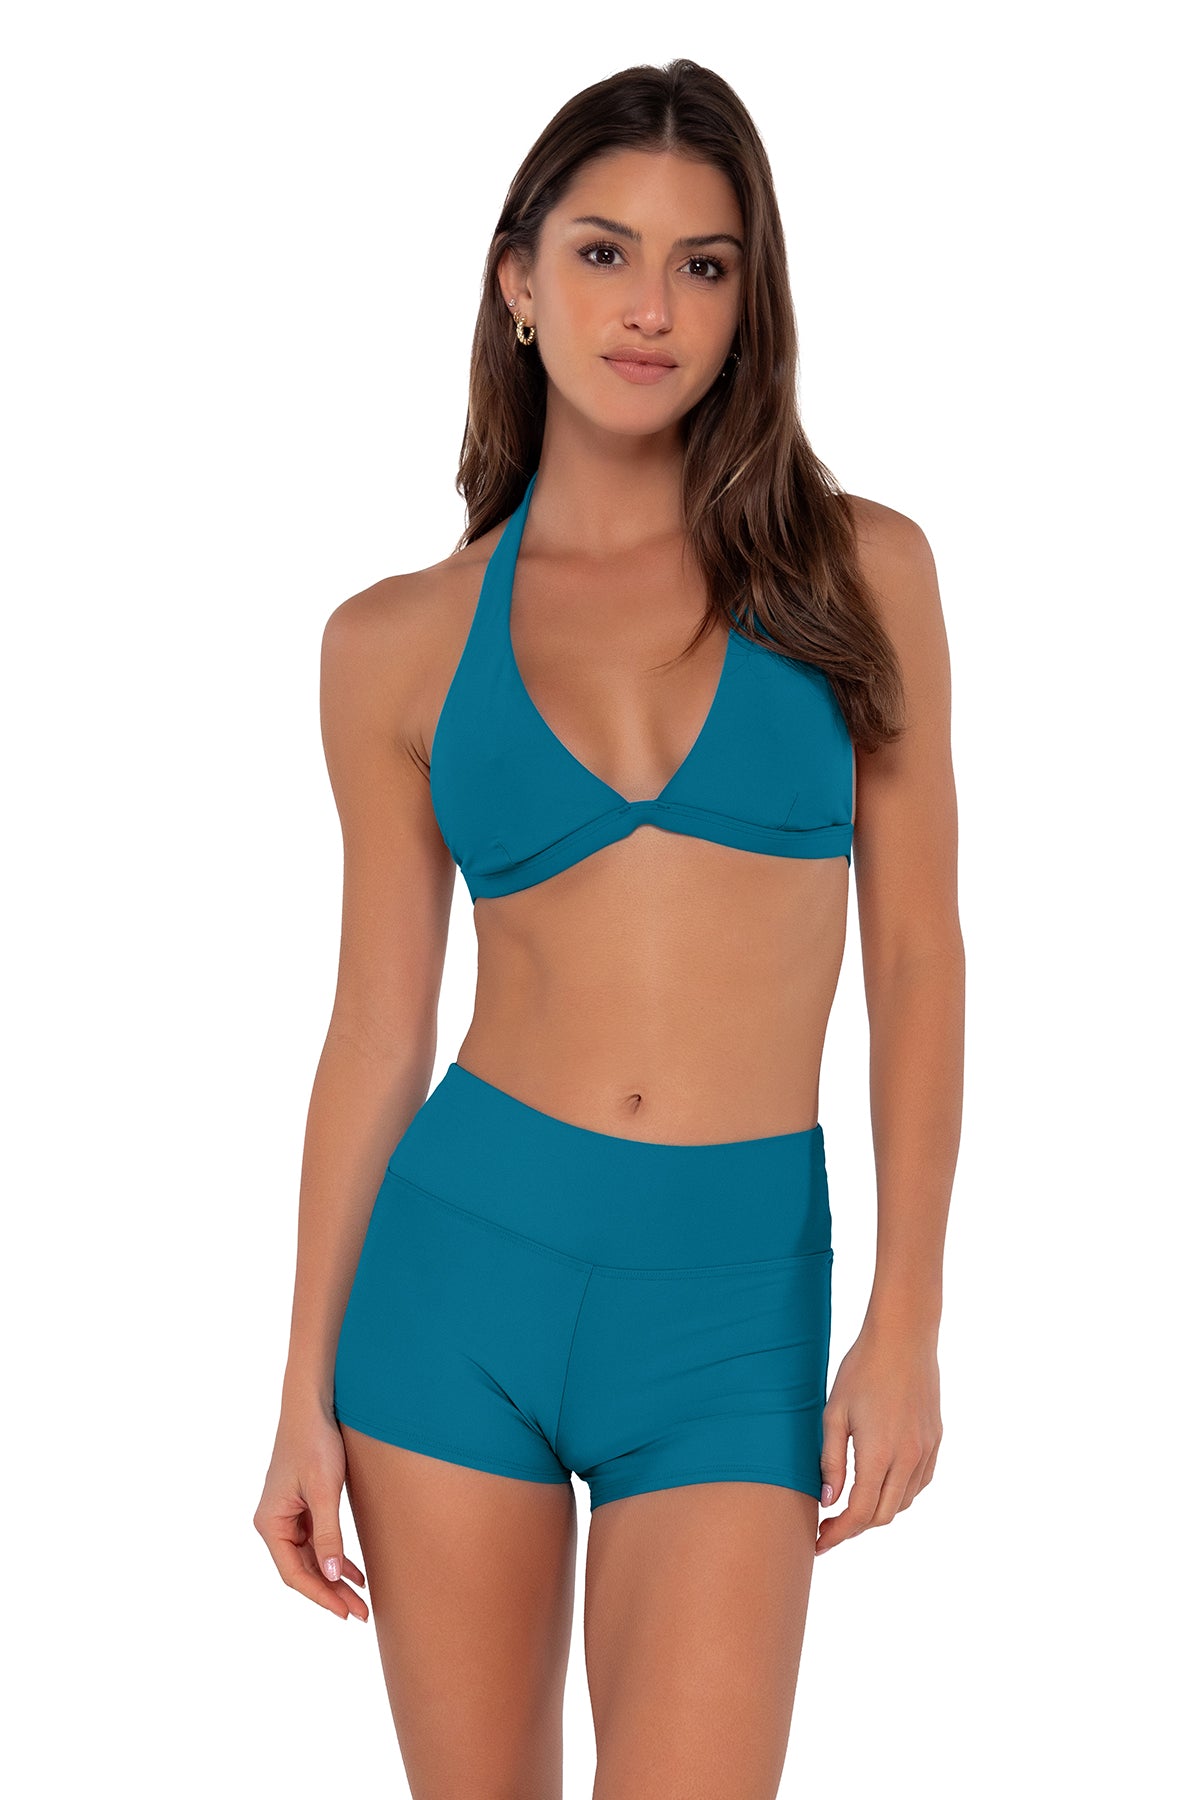 Front pose #1 of Gigi wearing Sunsets Avalon Teal Kinsley Swim Short paired with Faith Halter bikini top